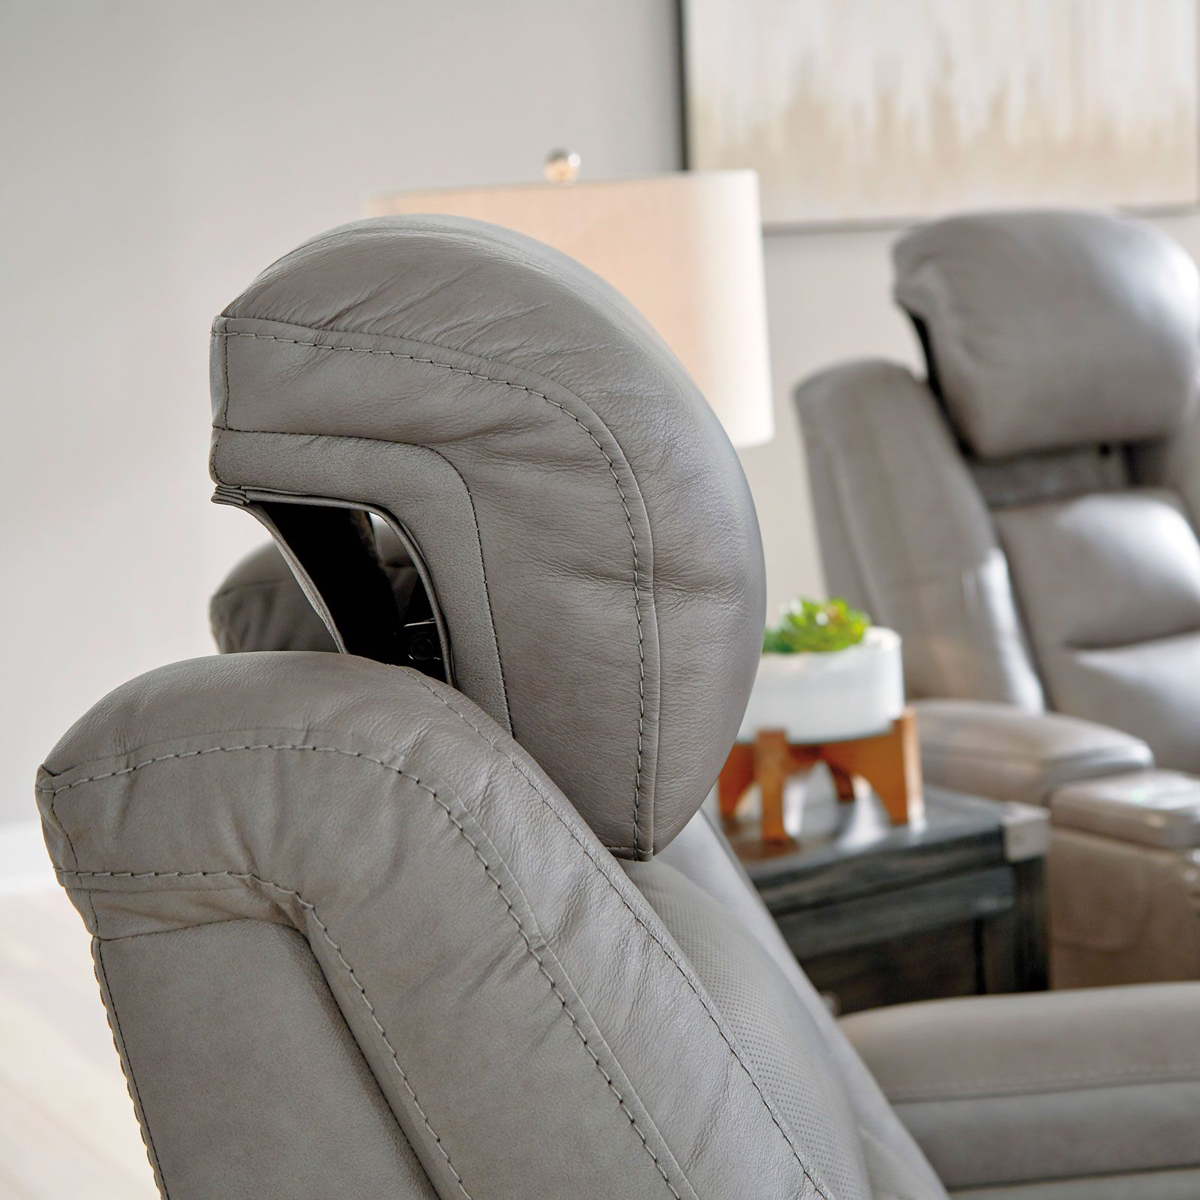 Picture of Gray Power Recliner